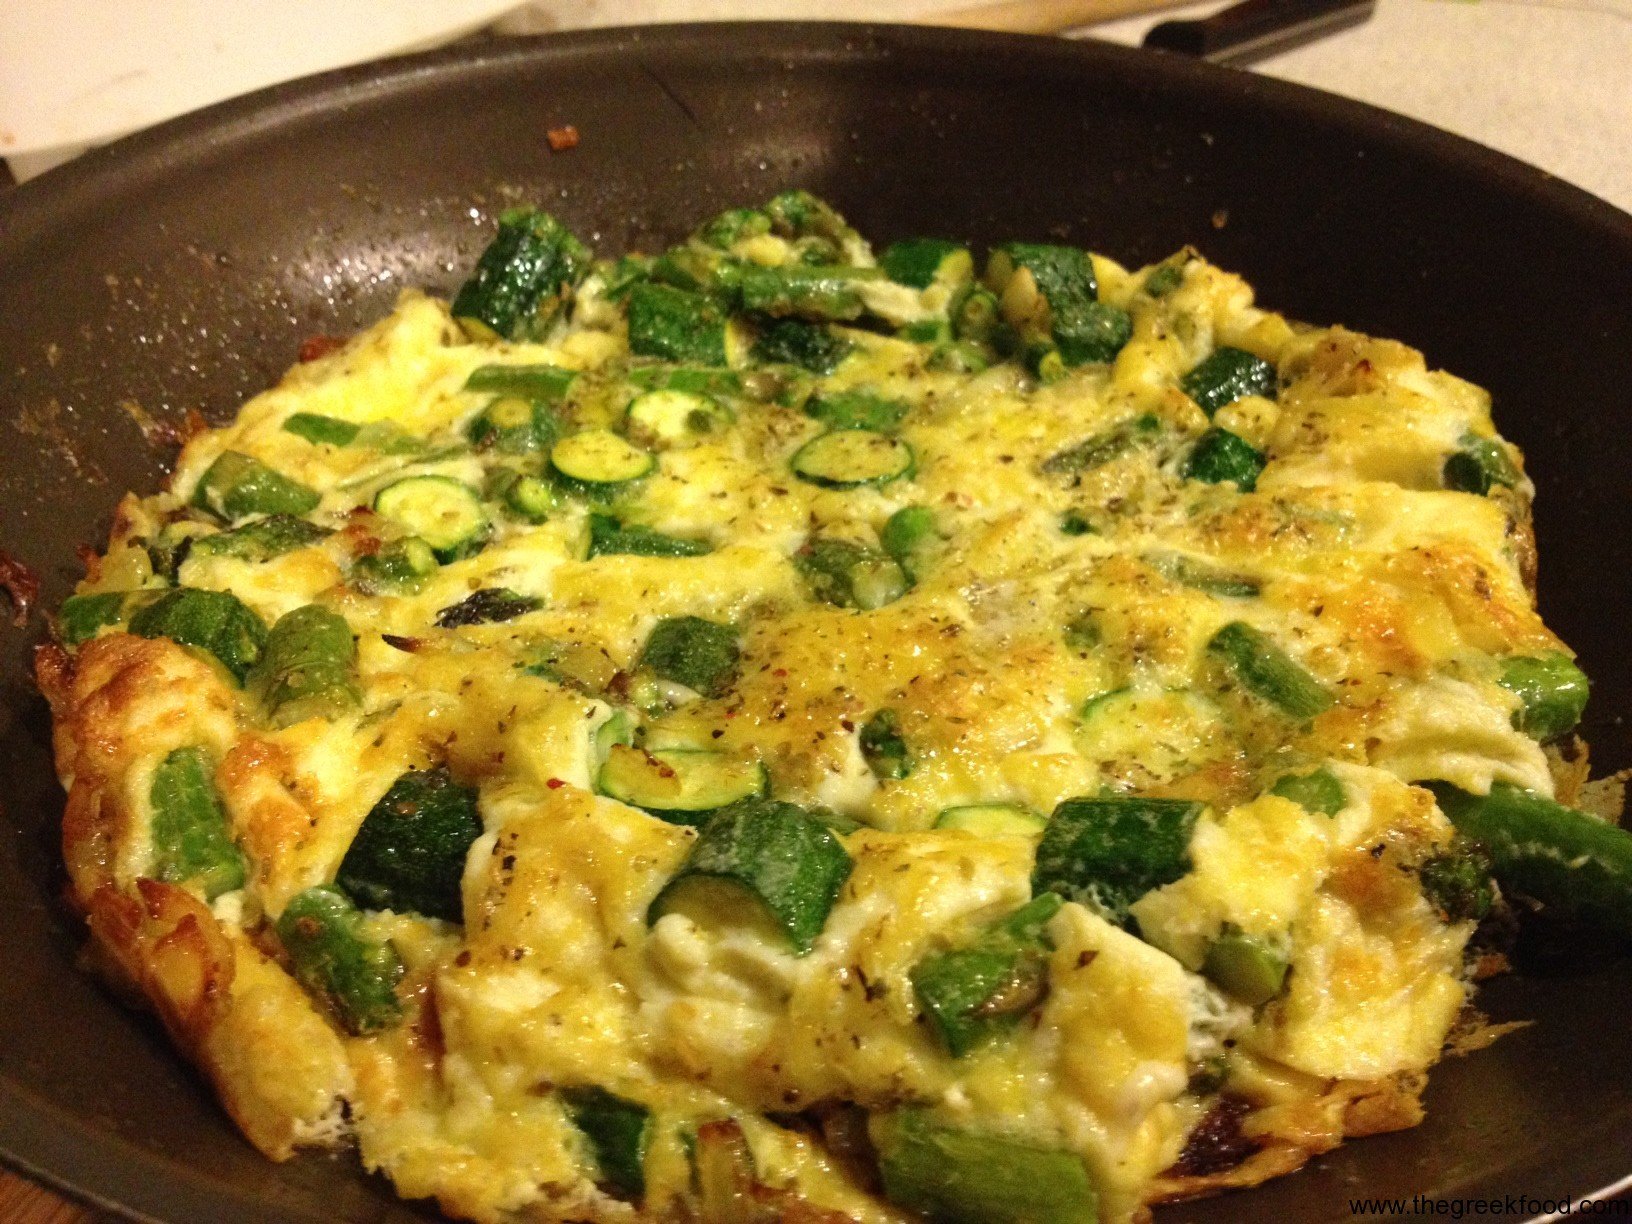 Oven baked omelet with Asparagus